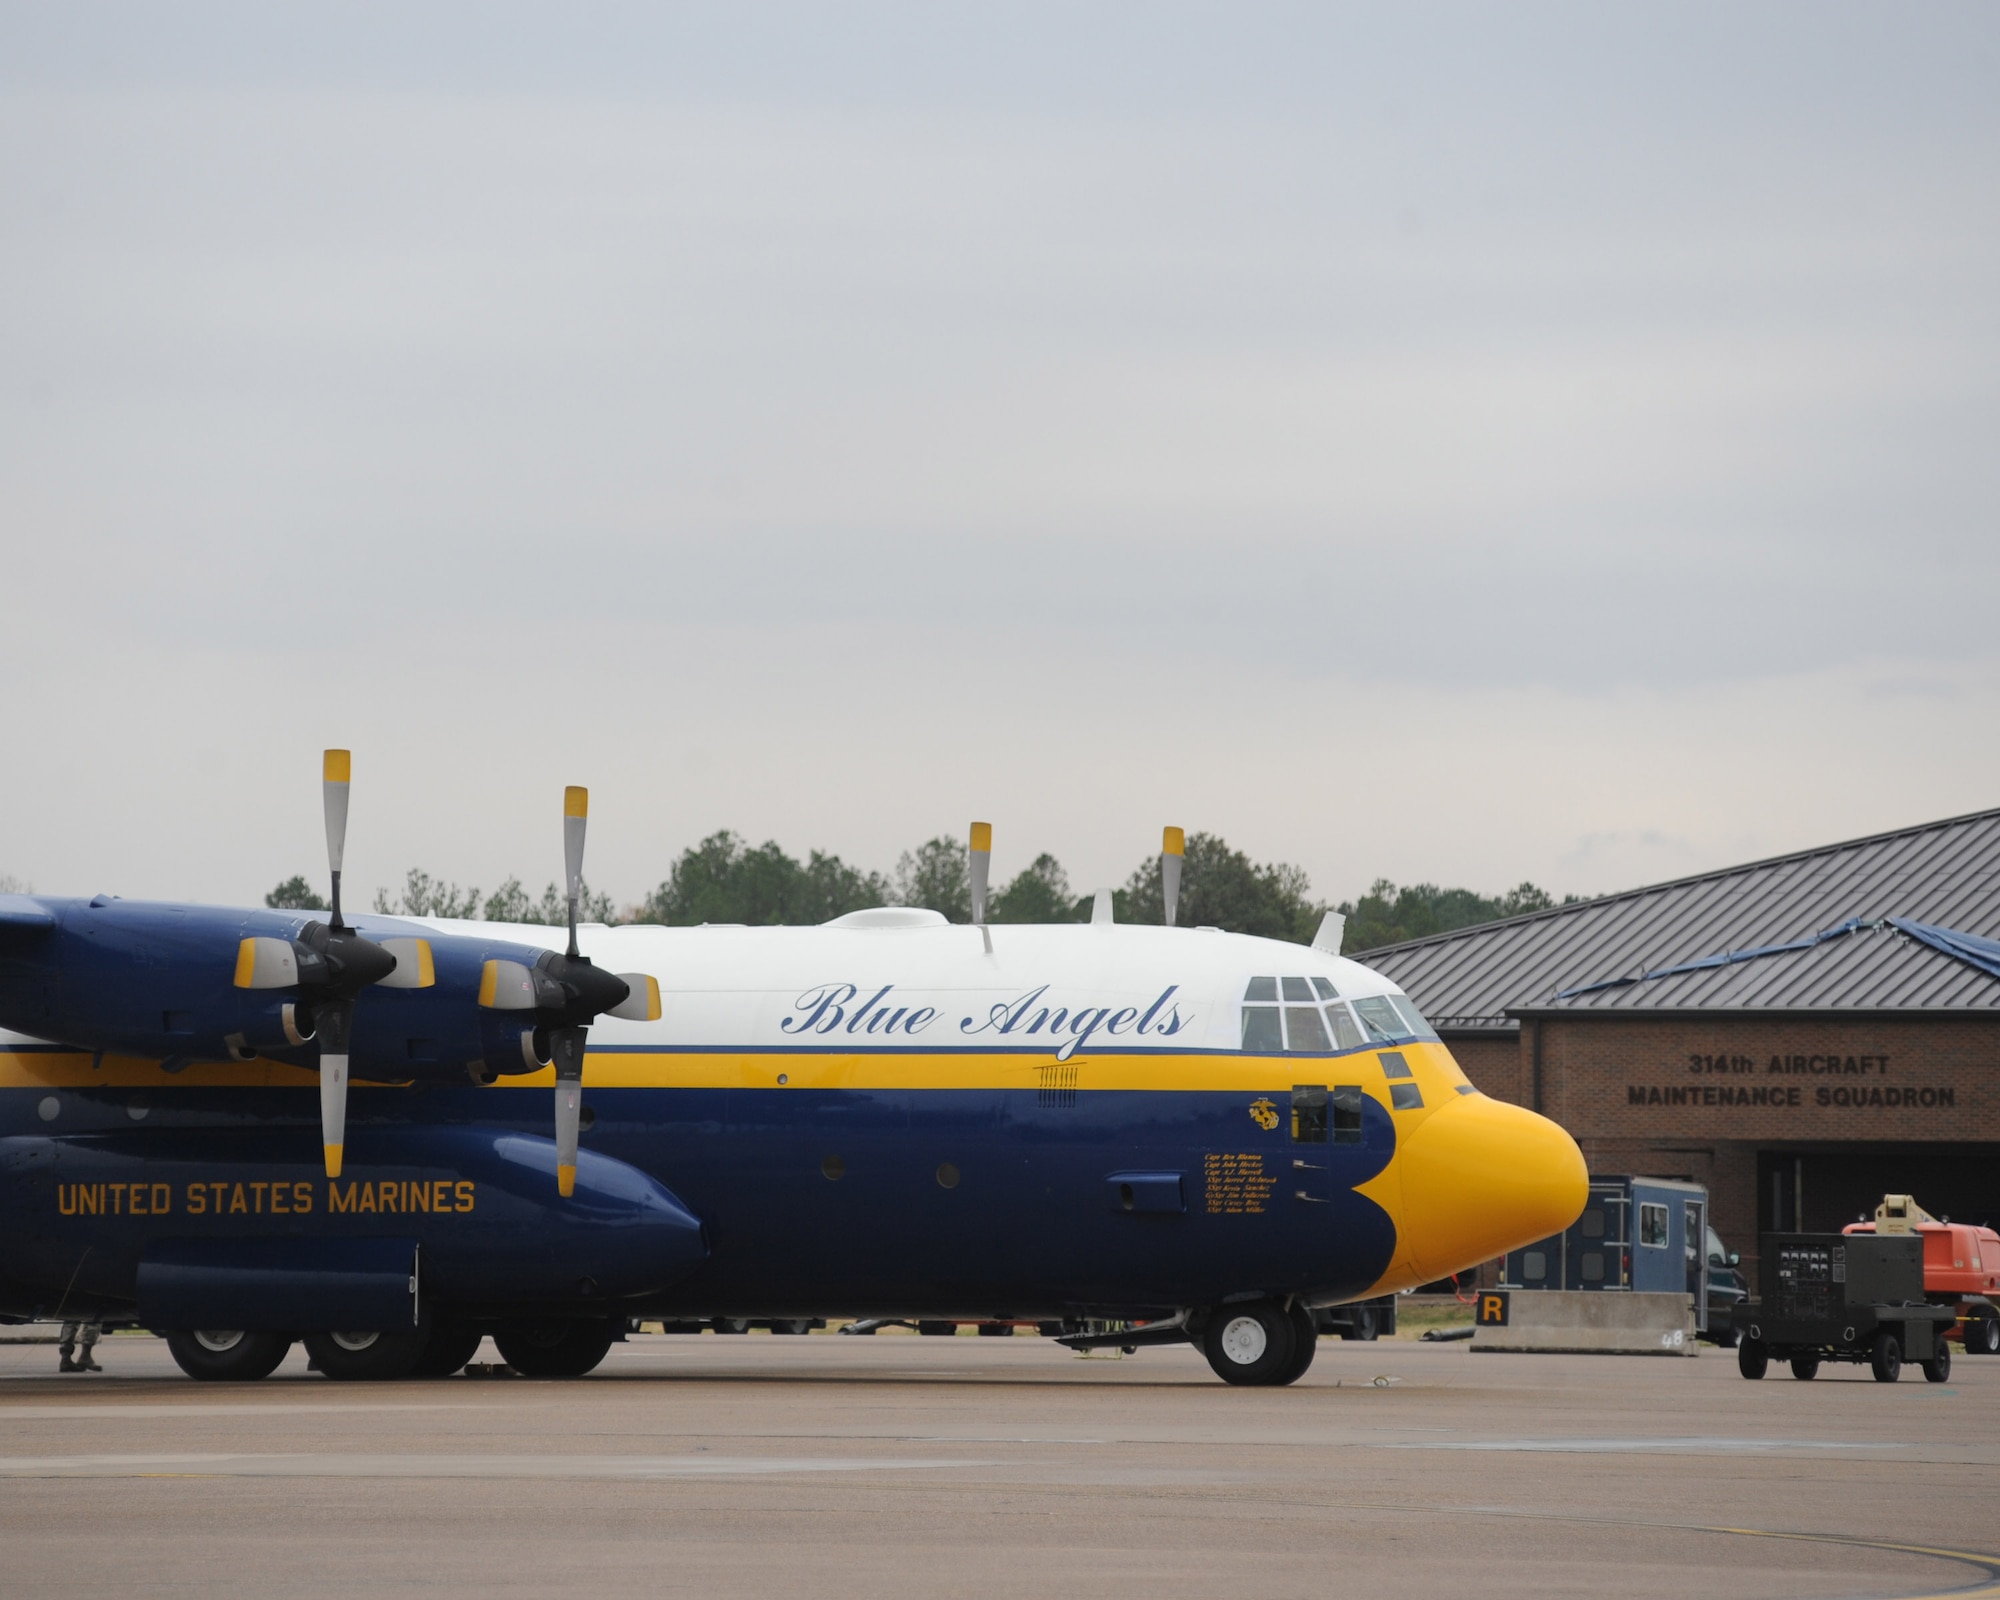 The 314th Aircraft Maintenance Squadron performed routine maintenance on the Blue Angels C-130T Hercules nicknamed “Fat Albert” Dec. 16, 2011, at Little Rock Air Force Base, Ark. The dual rail shop from the 314th AMXS removed the rail system from “Fat Albert” to repair, repaint and polish before the start of the team’s demonstration season.  The Blue Angels will headline the open house and air show at Little Rock AFB scheduled for Sept.  8 and 9. (U.S. Air Force photo by Tech. Sgt. Chad Chisholm)
